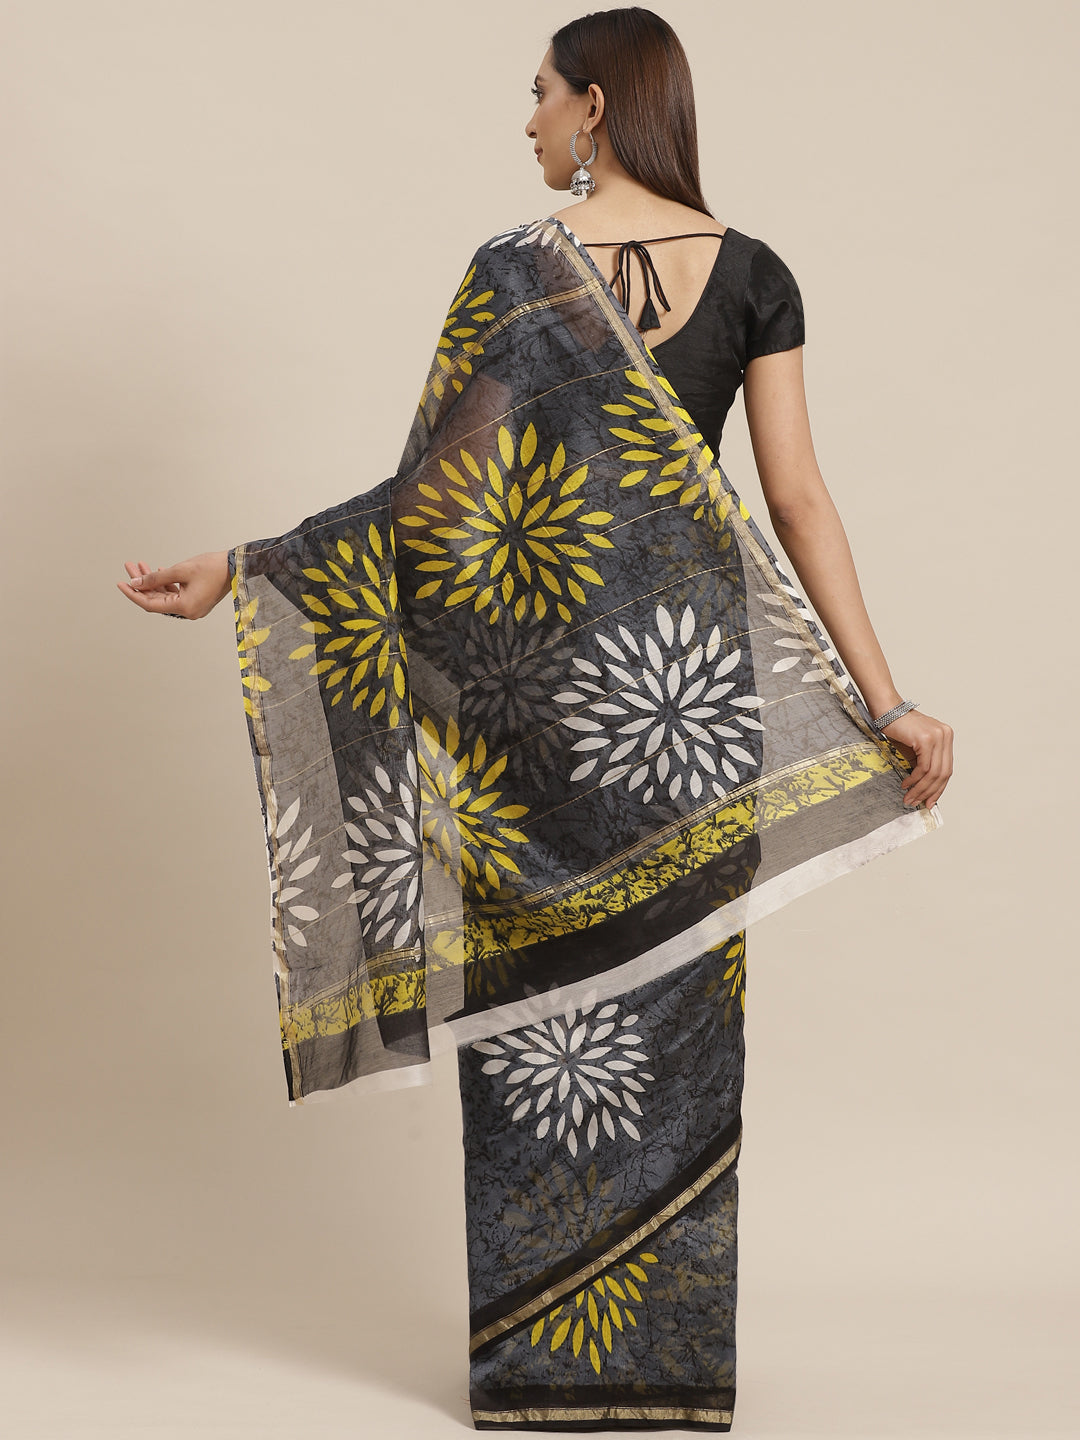 Grey and Yellow, Kalakari India Pure Cotton Handblock Printed Saree and Blouse RCBGSA0013-Saree-Kalakari India-RCBGSA0013-Cotton, Geographical Indication, Hand Block, Hand Crafted, Heritage Prints, Natural Dyes, Red, Sarees, Sustainable Fabrics, Woven, Yellow-[Linen,Ethnic,wear,Fashionista,Handloom,Handicraft,Indigo,blockprint,block,print,Cotton,Chanderi,Blue, latest,classy,party,bollywood,trendy,summer,style,traditional,formal,elegant,unique,style,hand,block,print, dabu,booti,gift,present,glamo